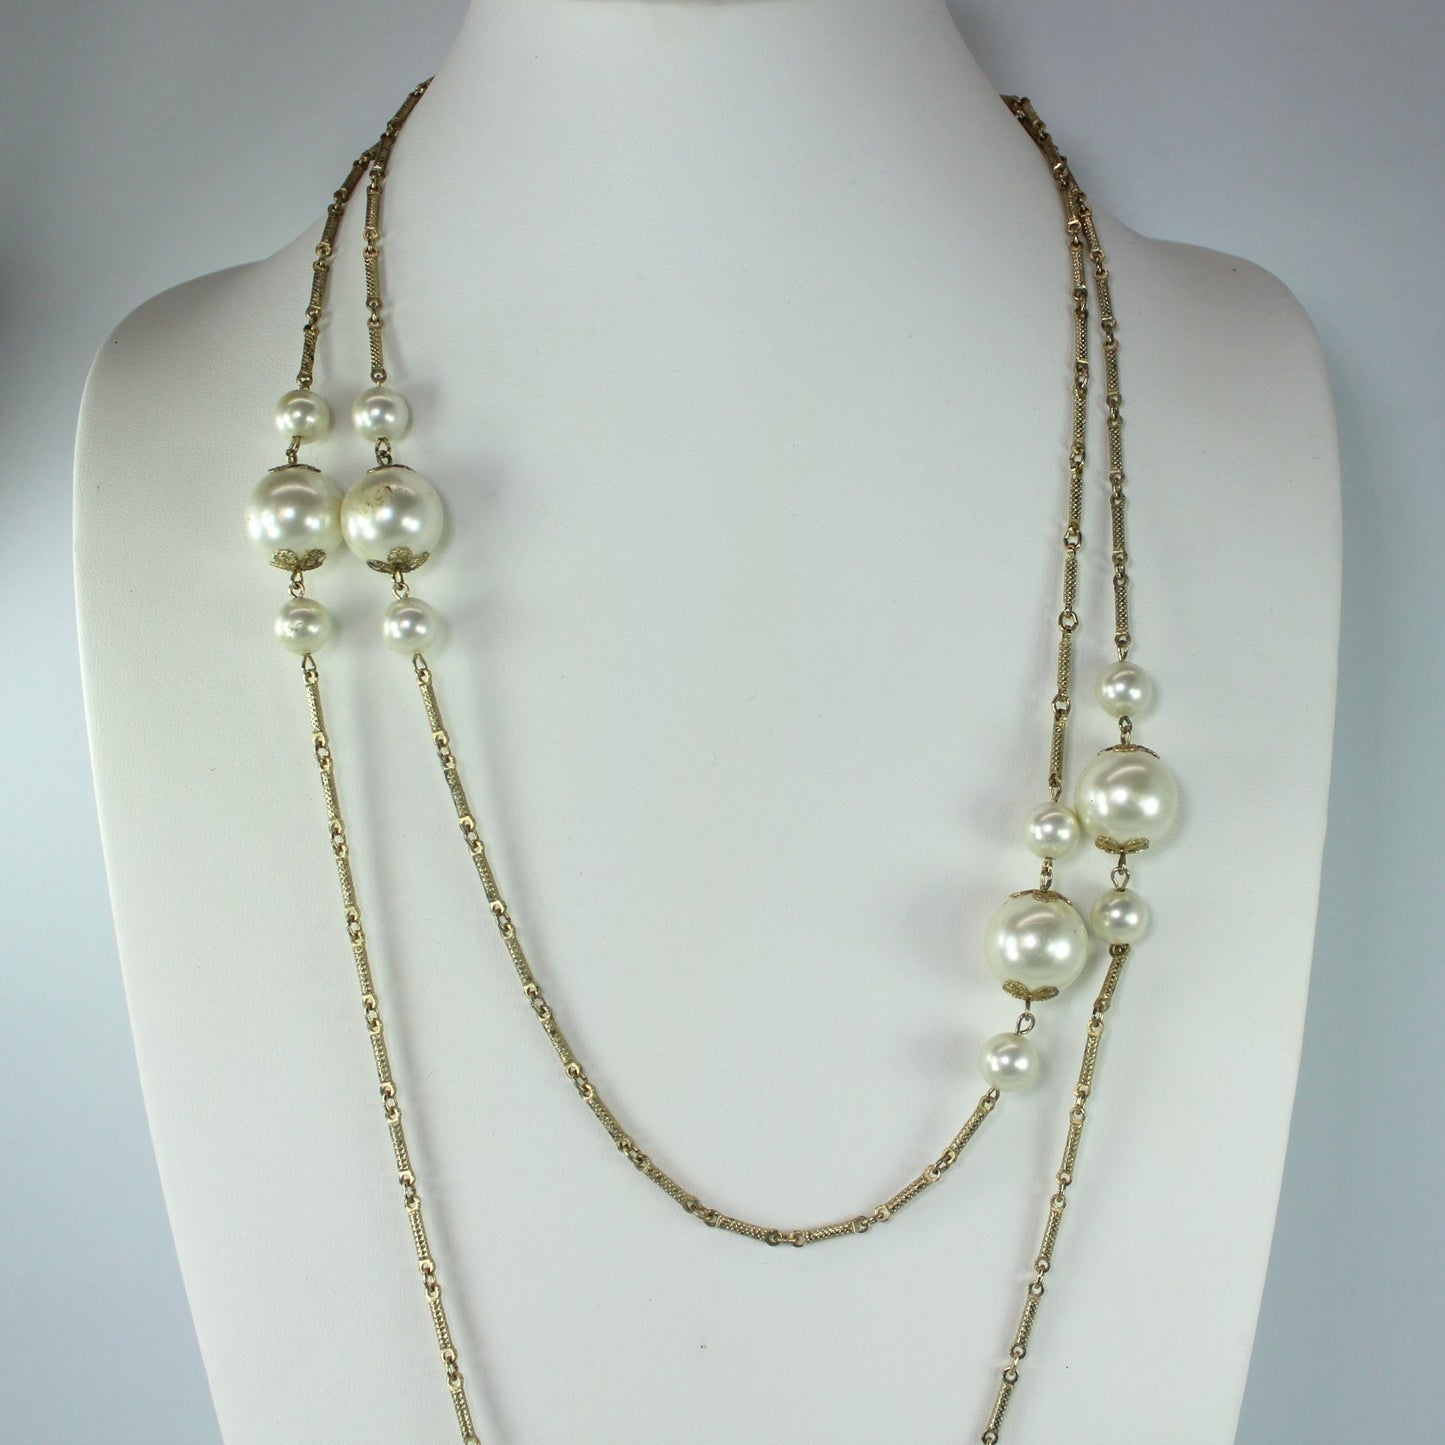 Coro 60" Long Vintage Necklace Pearls Gold Tone Chain Links closer view